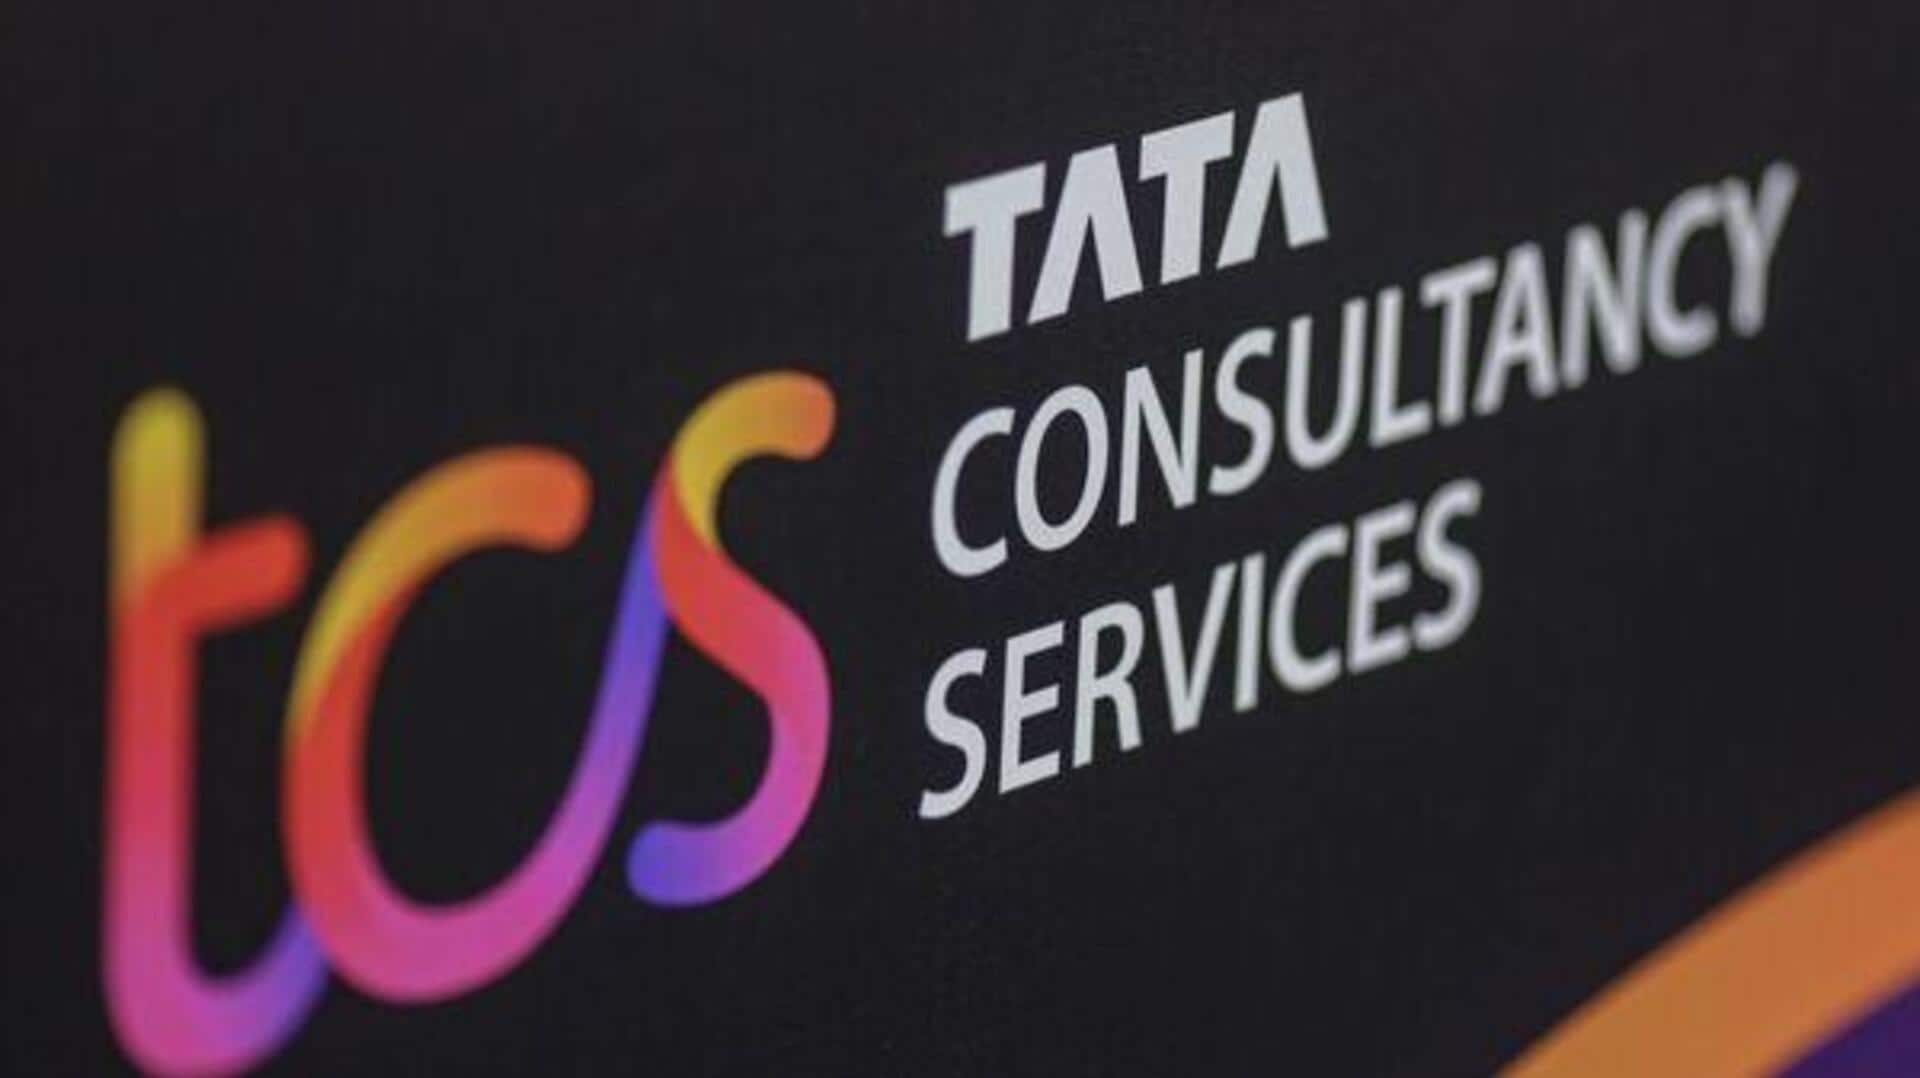 TCS's m-cap surpasses Rs. 15 lakh crore for first time